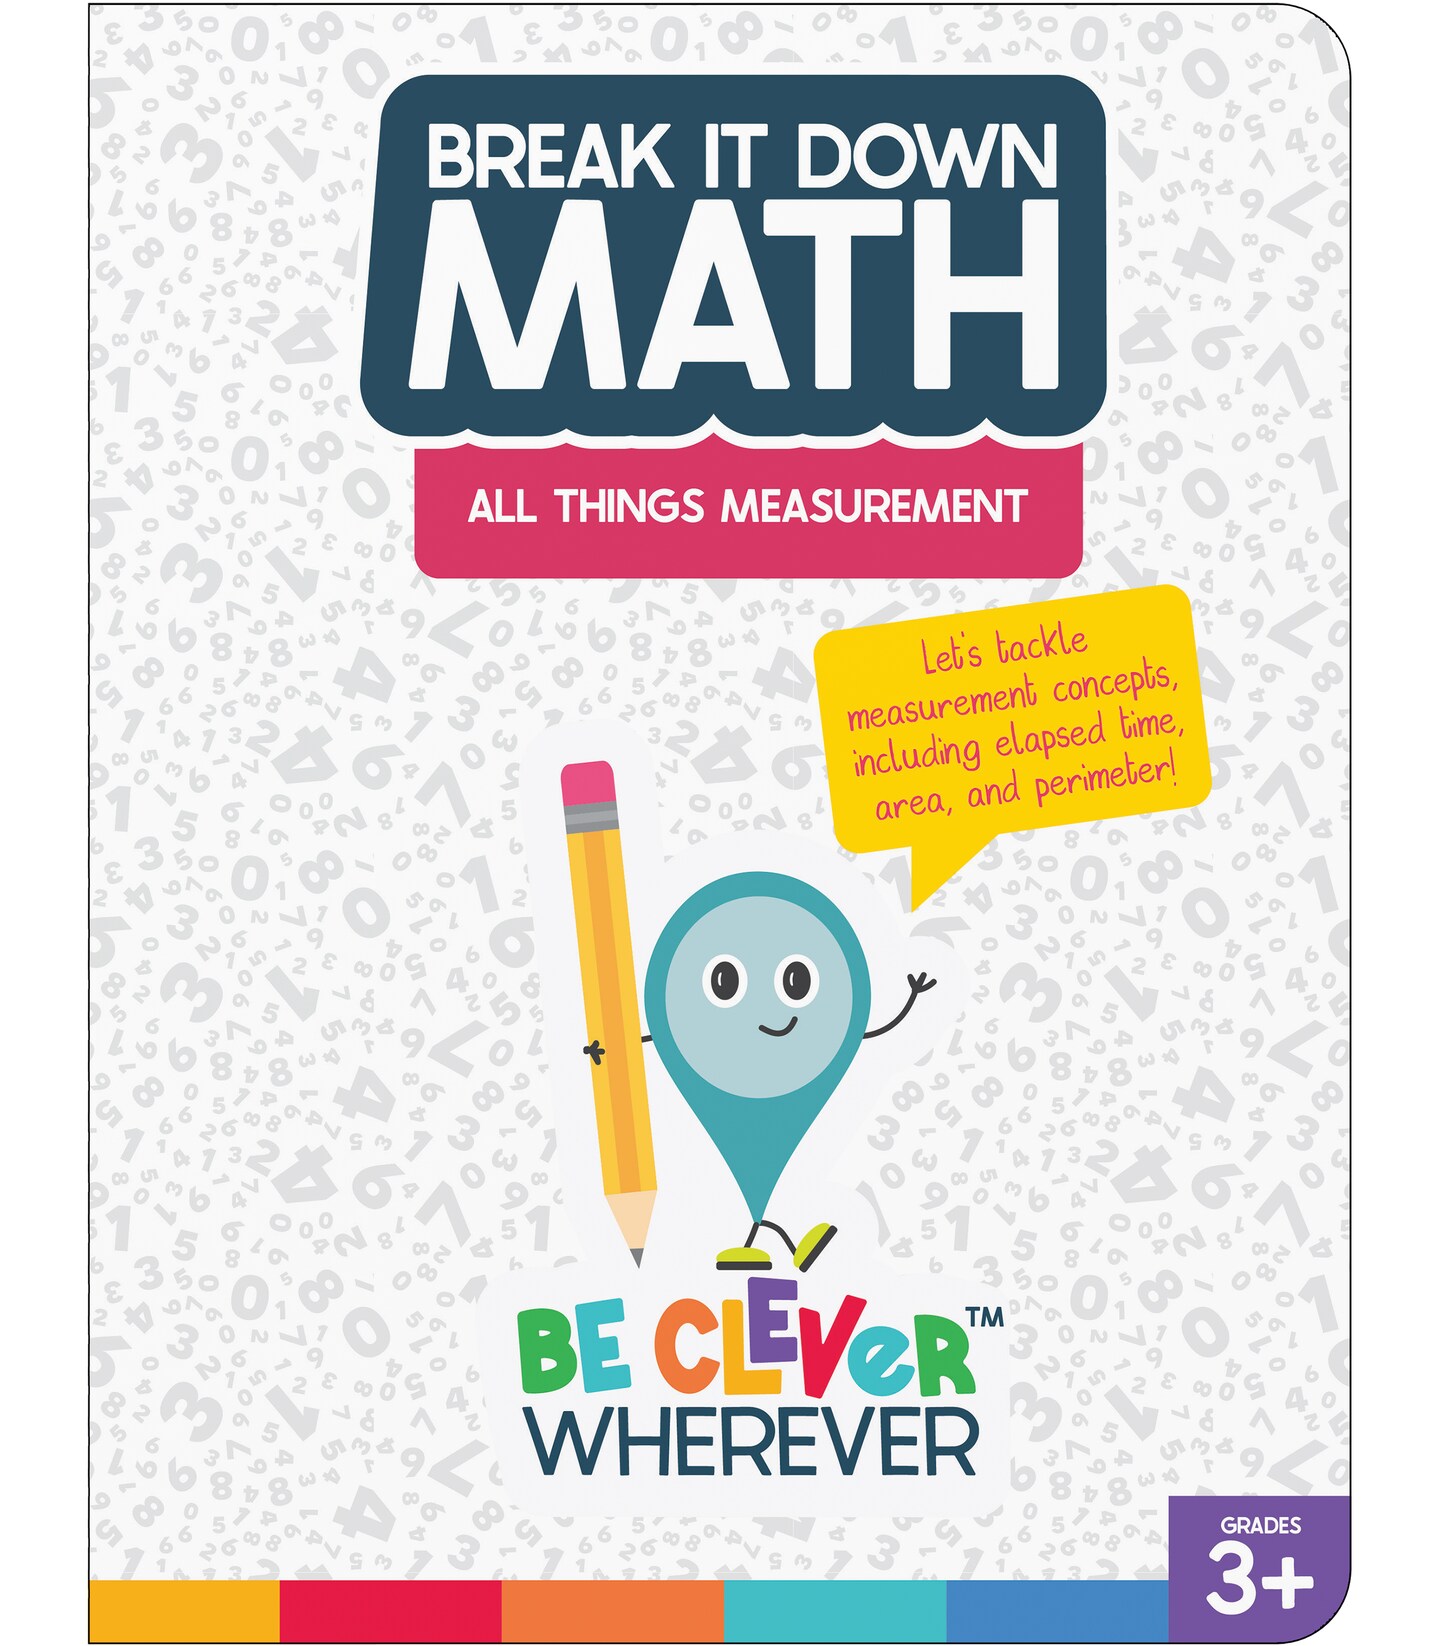 Carson Dellosa Break It Down Grades 3-5 All Things Measurement Math Reference Book, 3rd, 4th, &#x26; 5th Grade Math Guide to Measuring Length, Weight, Perimeter, Volume, and Area, Grades 3-5 Math Book